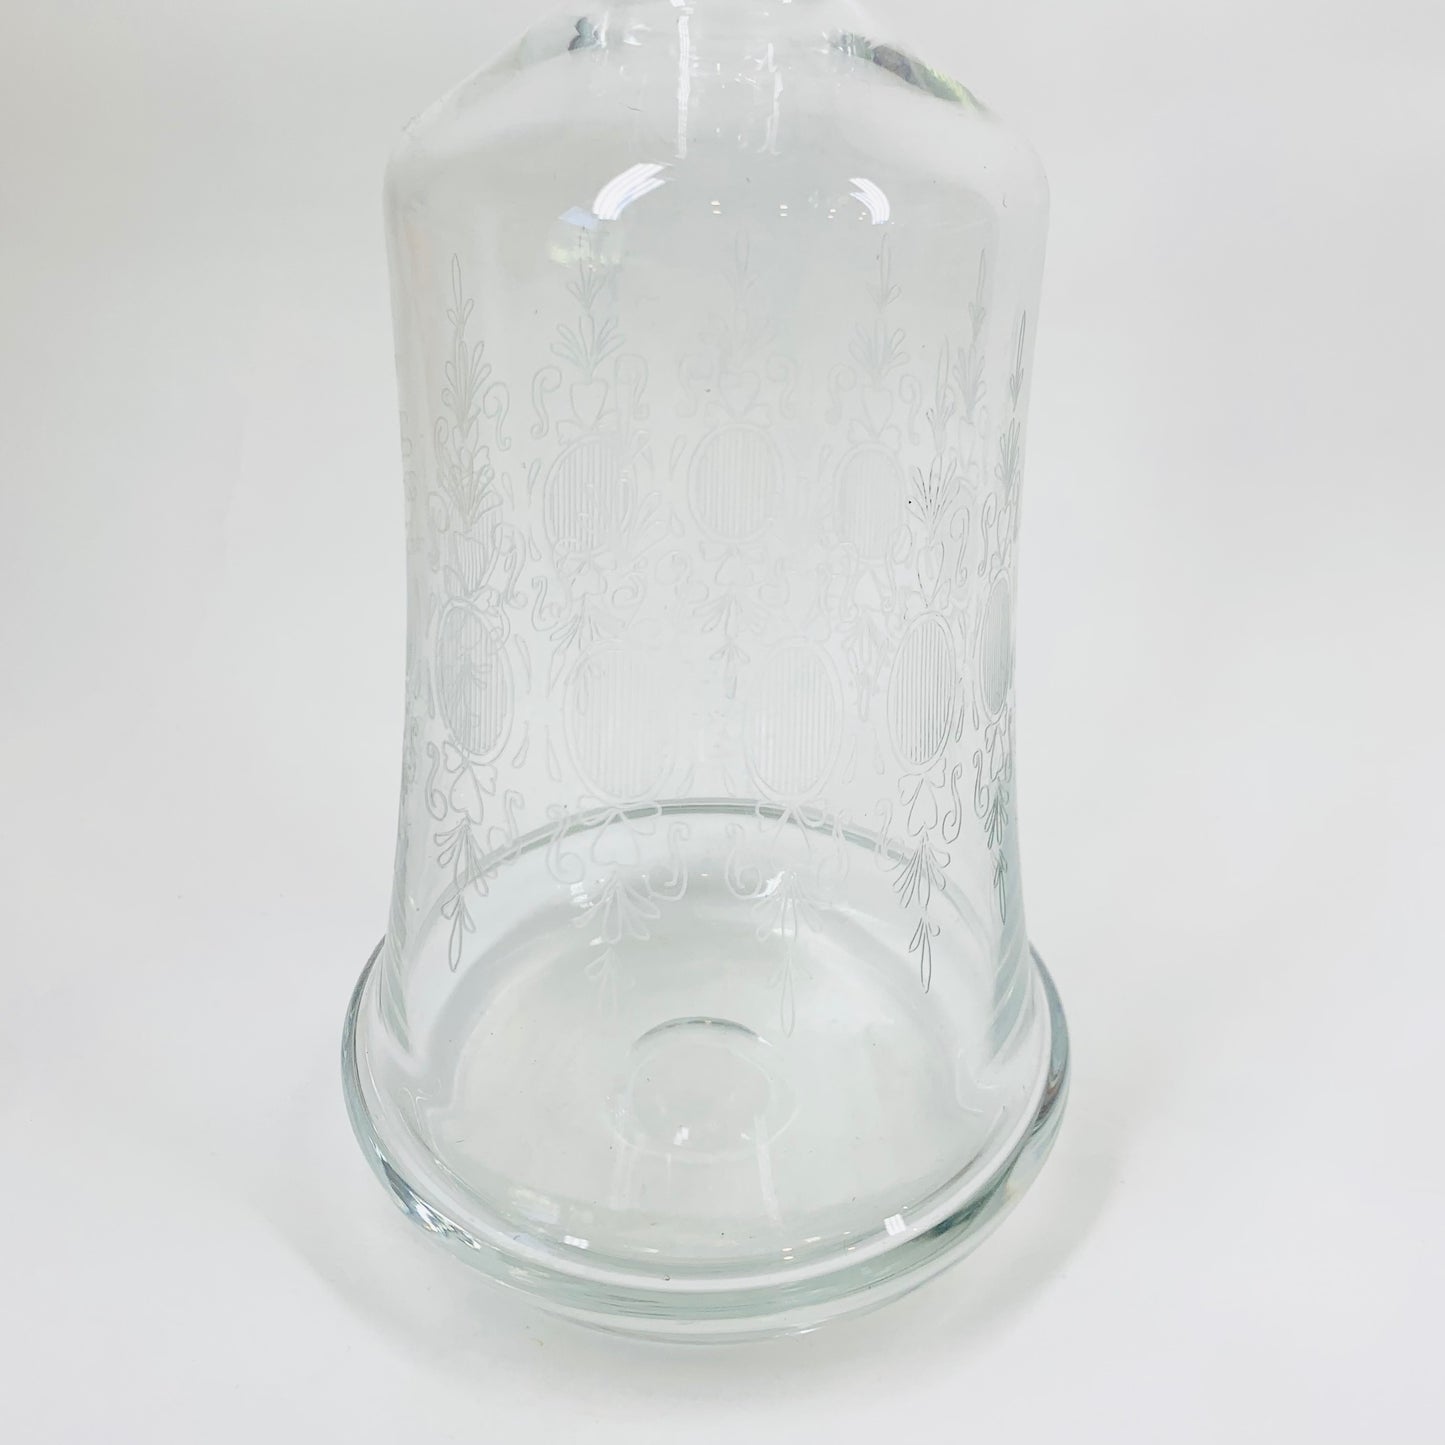 Midcentury etched glass decanter